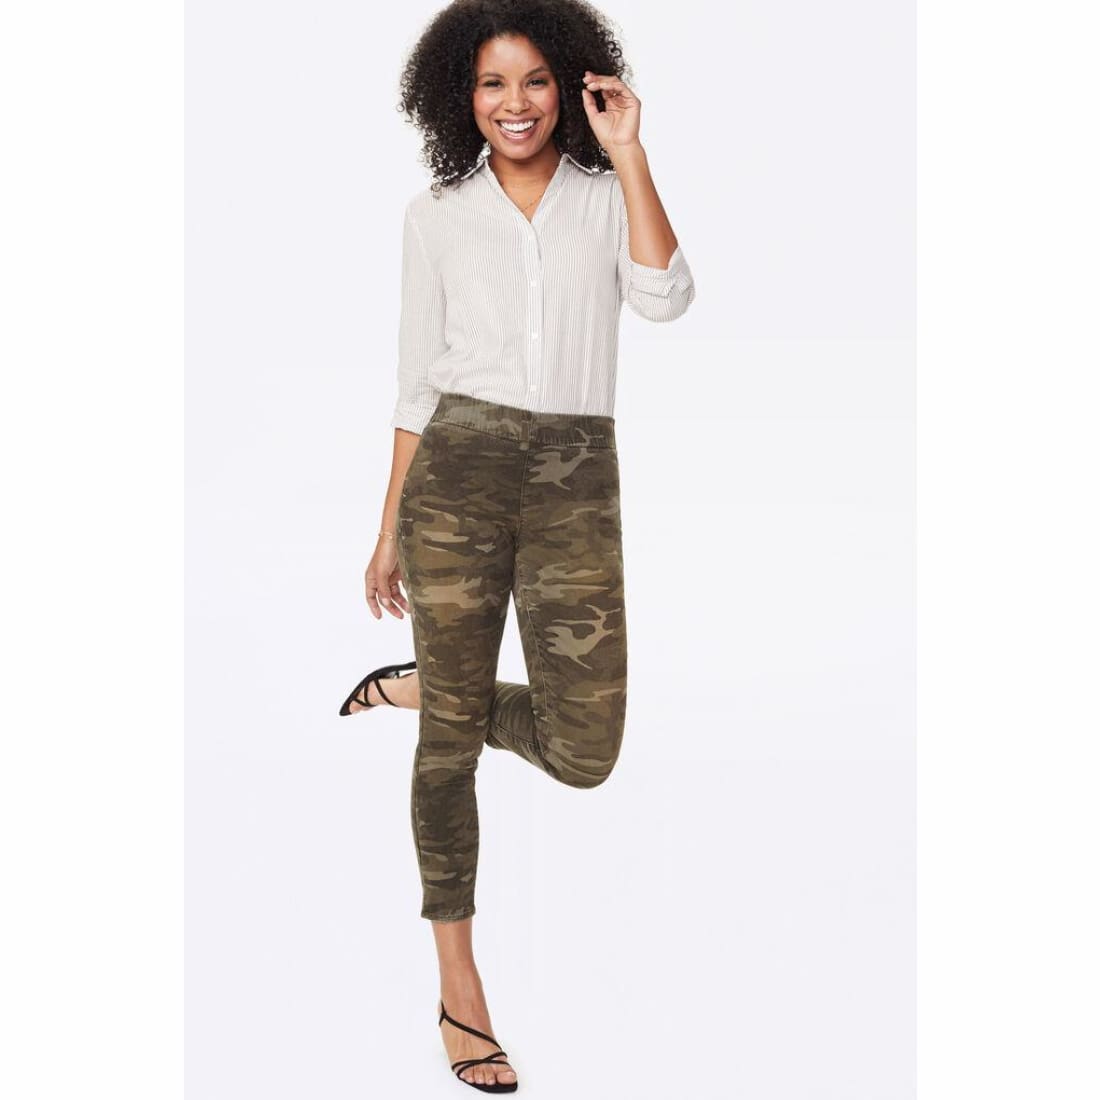 NYDJ Women's Skinny Ankle Pull-On Jeans With Slit Style (Camo)